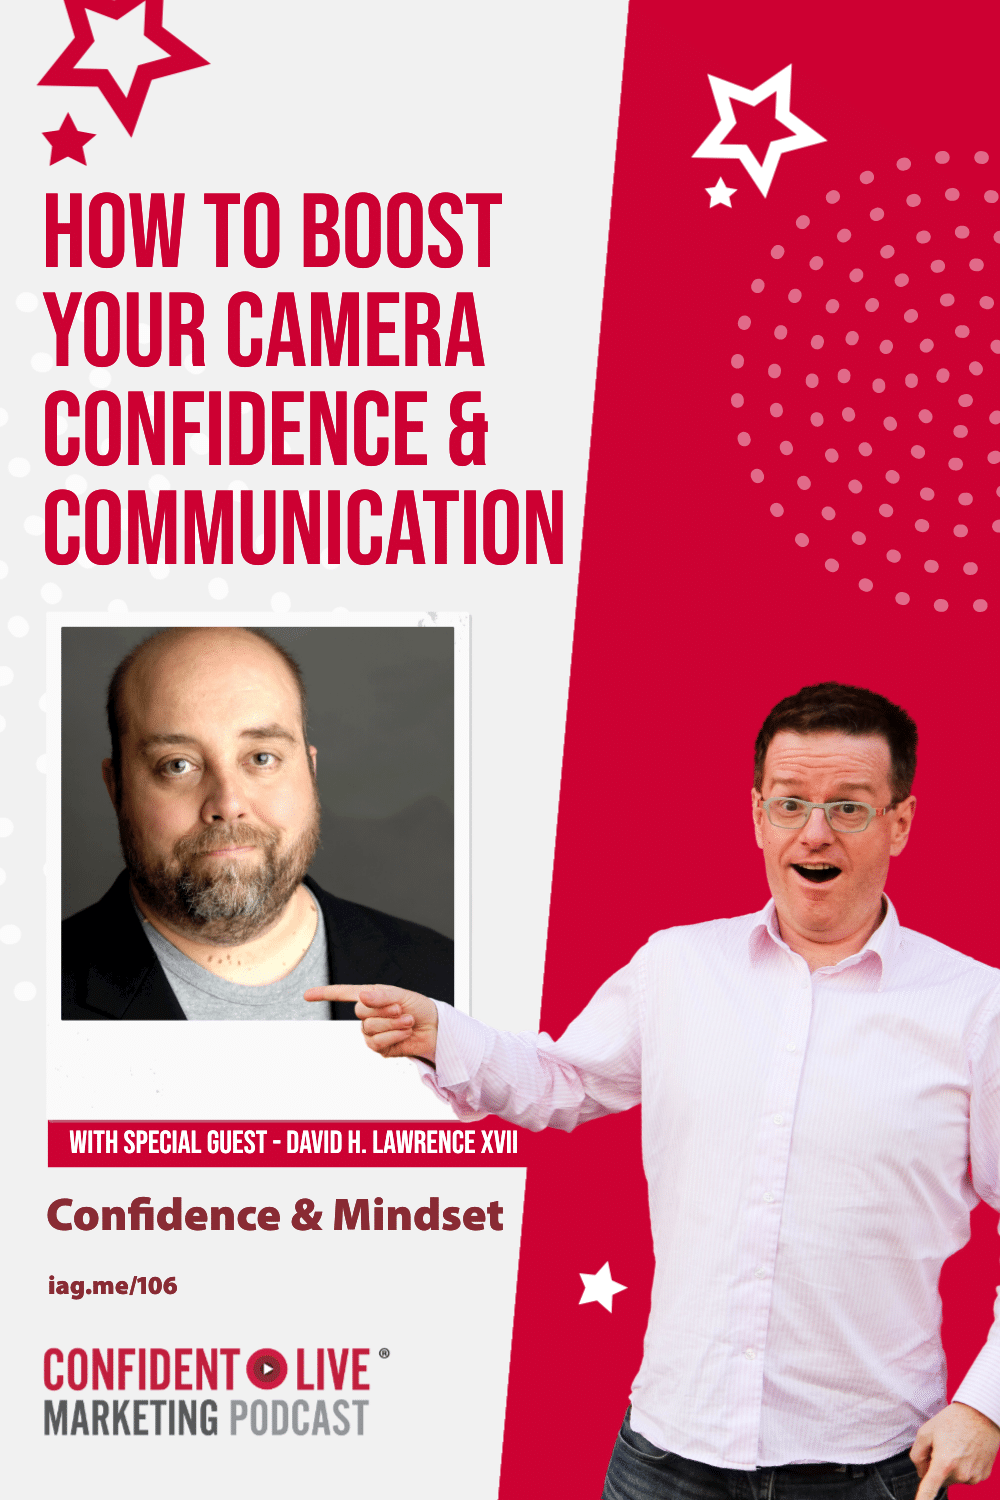 How to Boost Your Camera Confidence & Communication